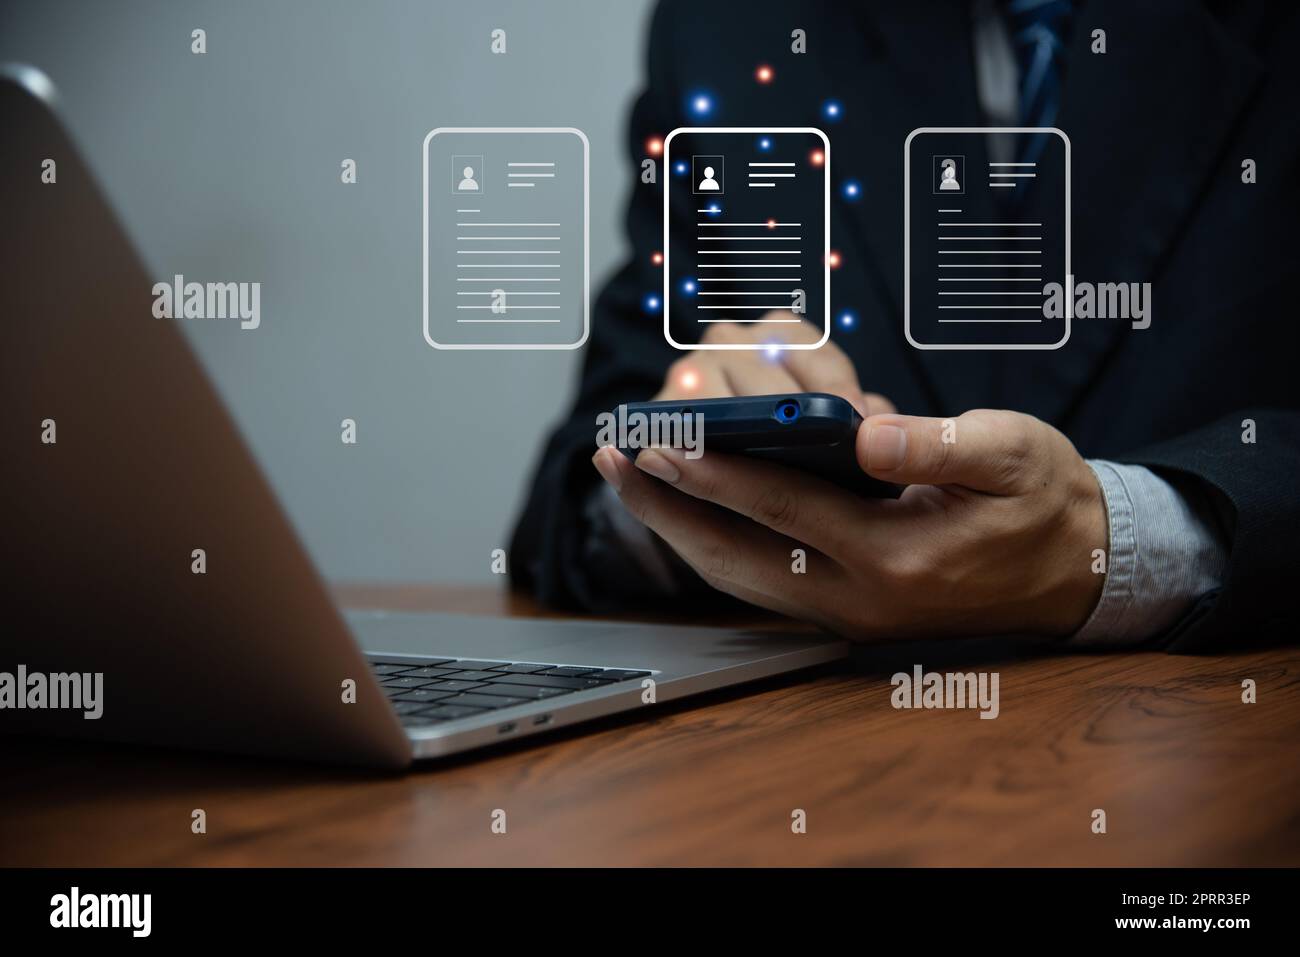 Businessman touching on virtual screen. Enterprise Resource Planning ERP document management concept with icons on the virtual screen. Stock Photo